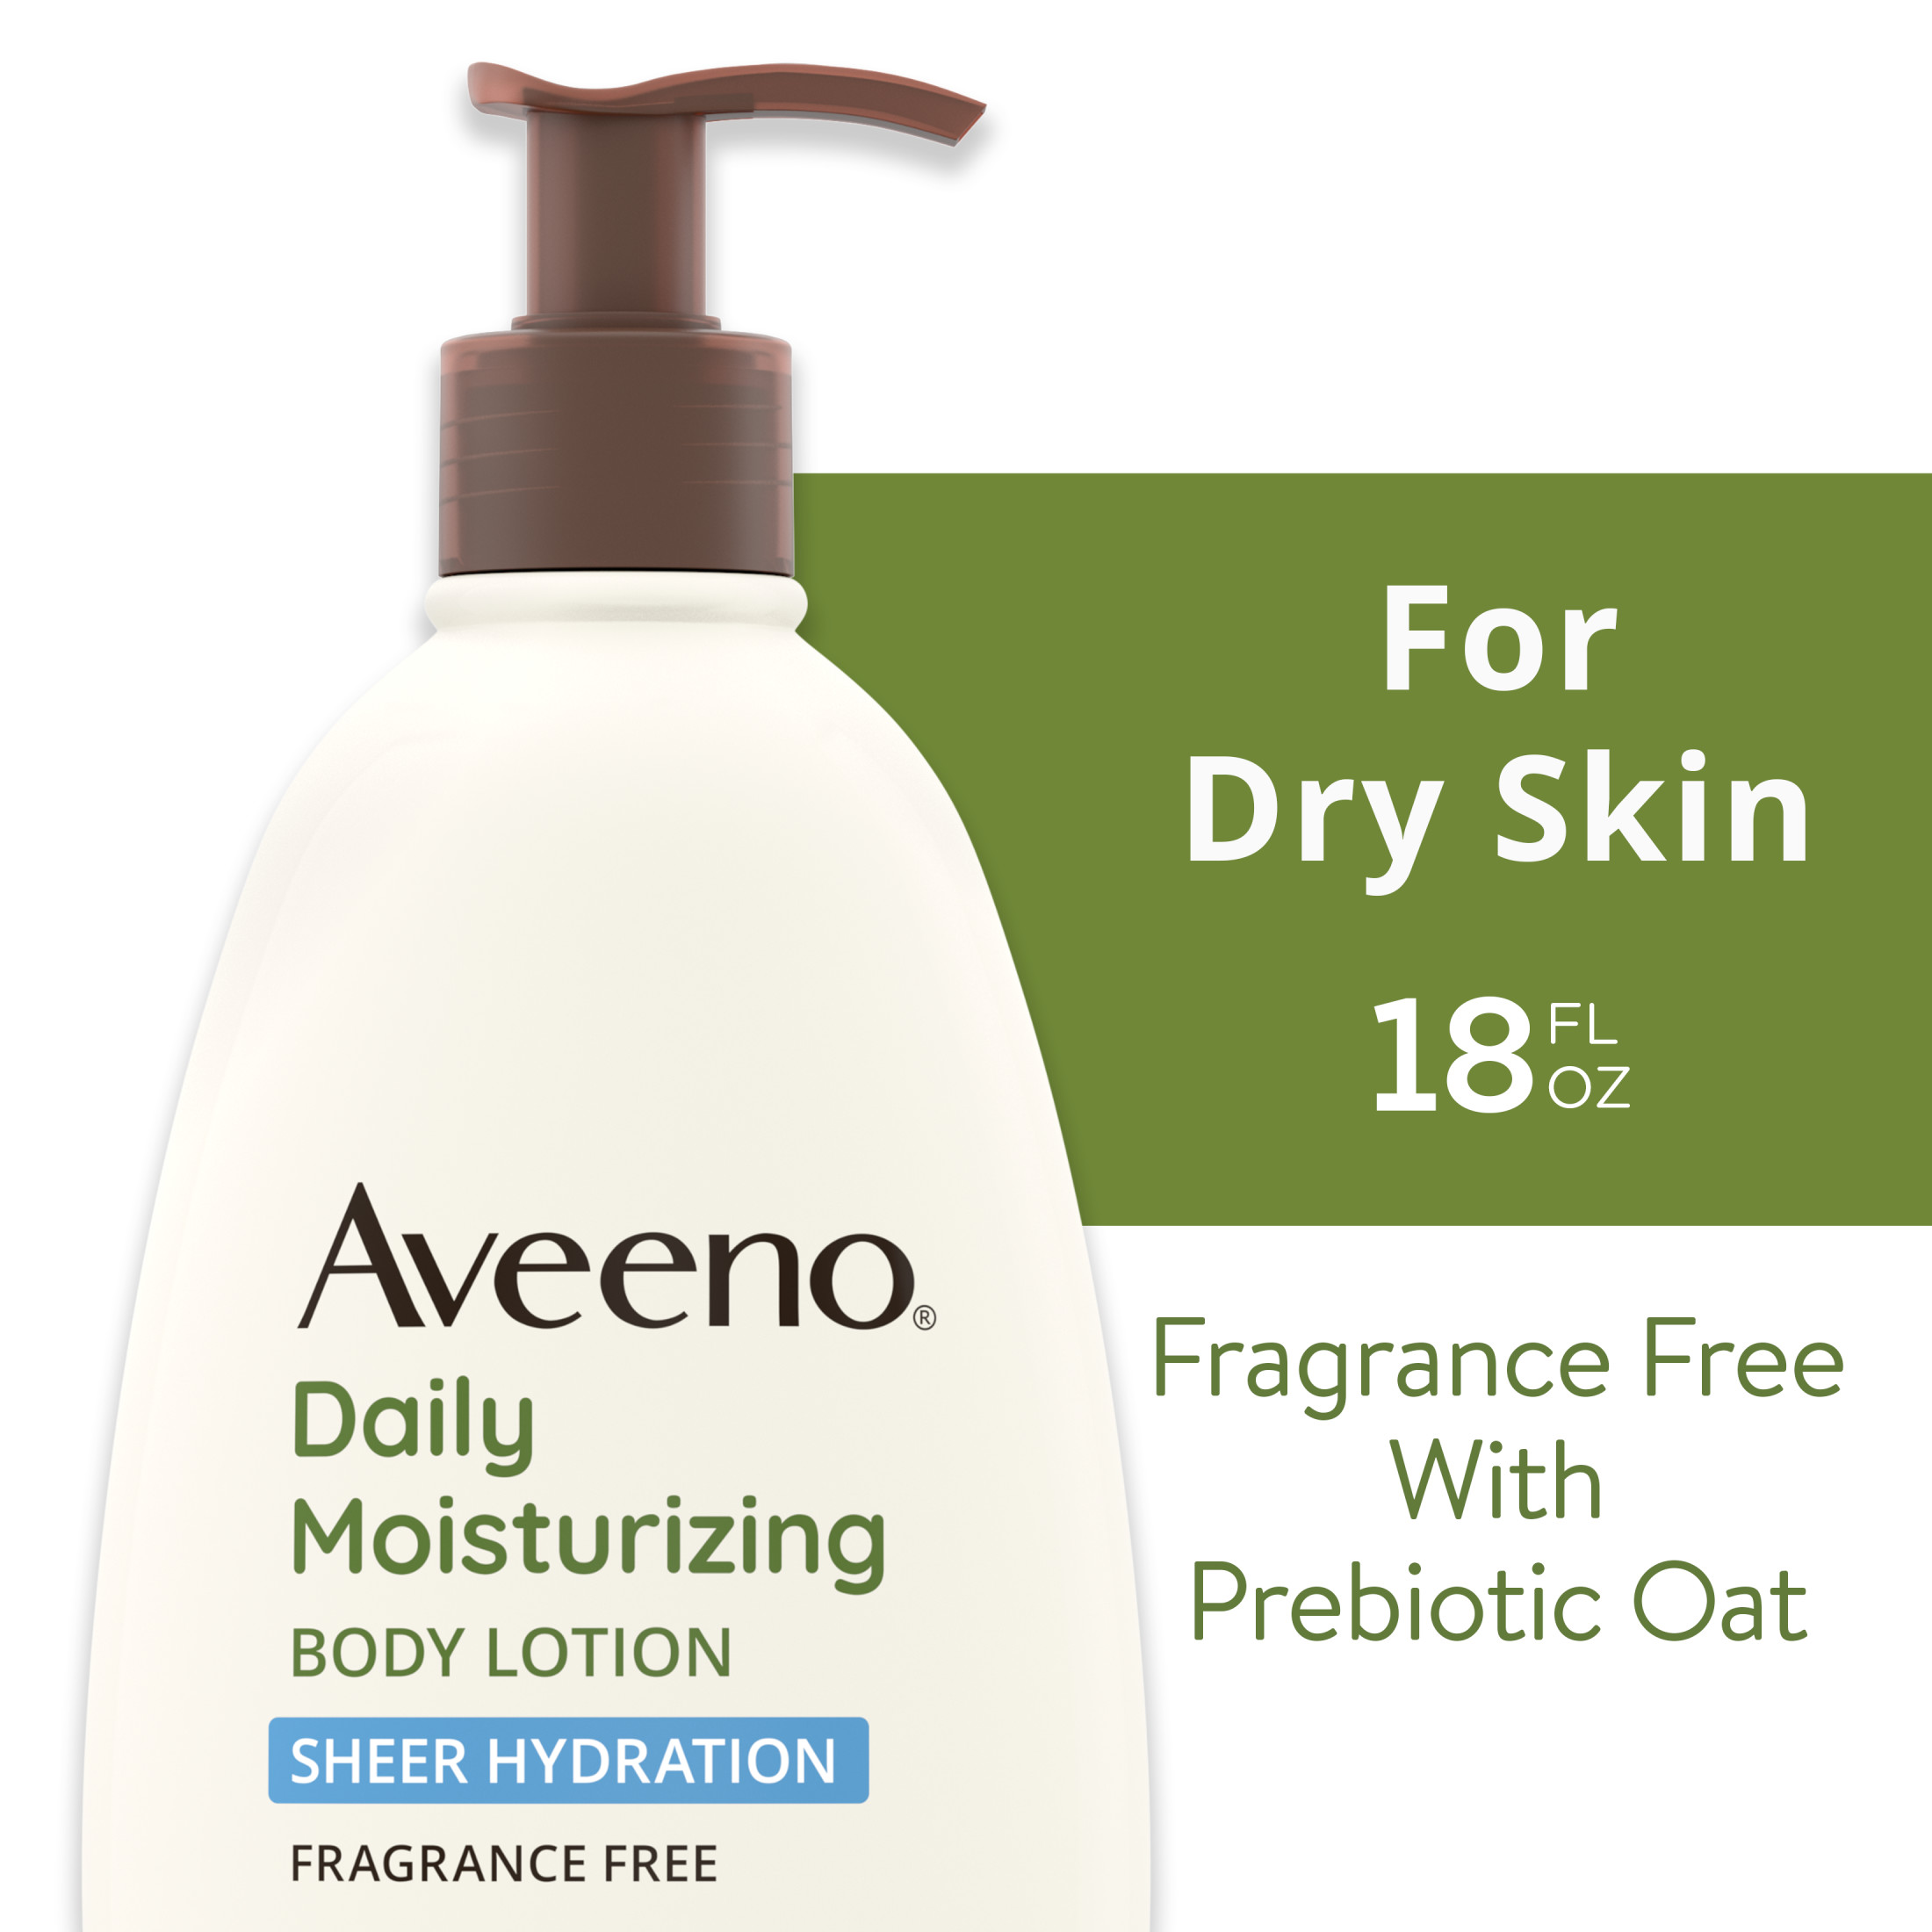 Aveeno Daily Moisturizing Body Lotion with Oat for Dry Skin, 18 fl oz - image 1 of 11